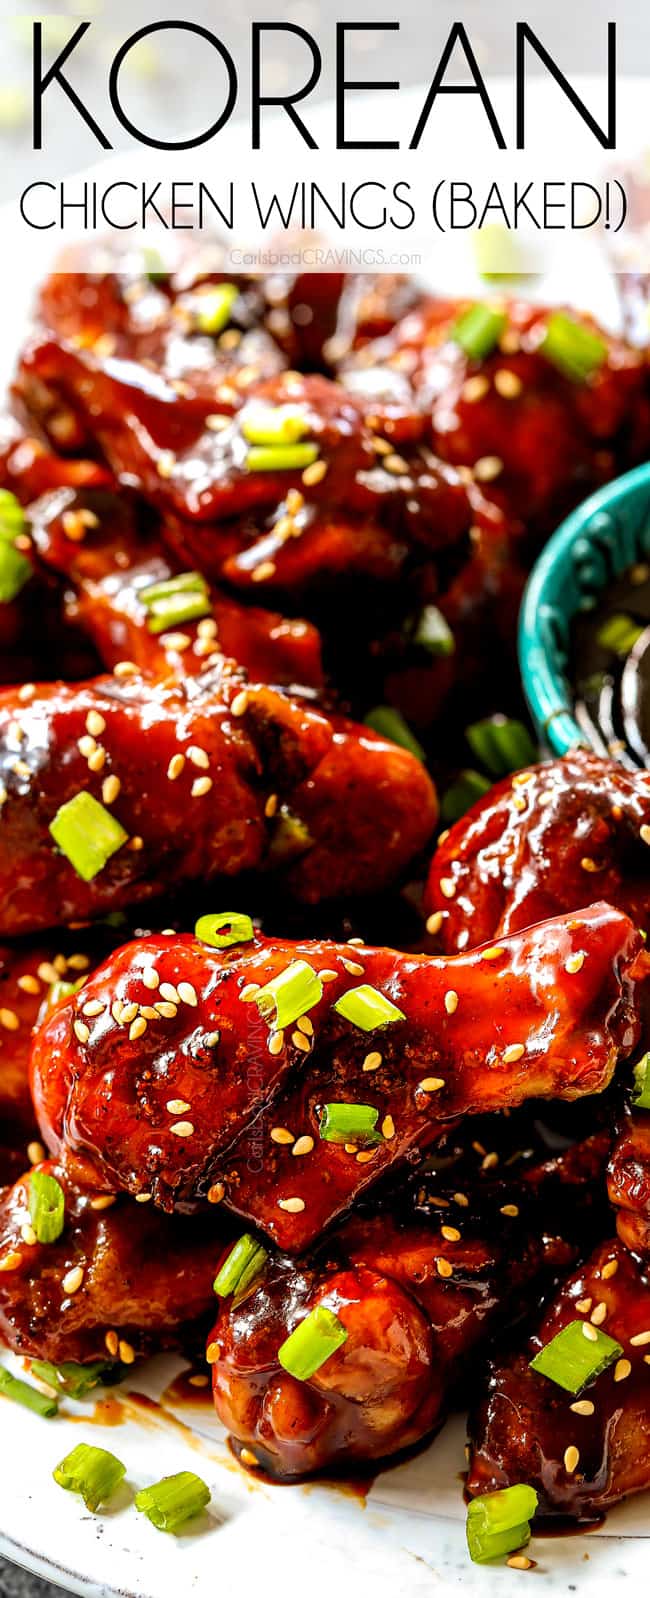 showing how to serve baked Korean Chicken Wings by lining on a platter with gochujang Korean BBQ Sauce